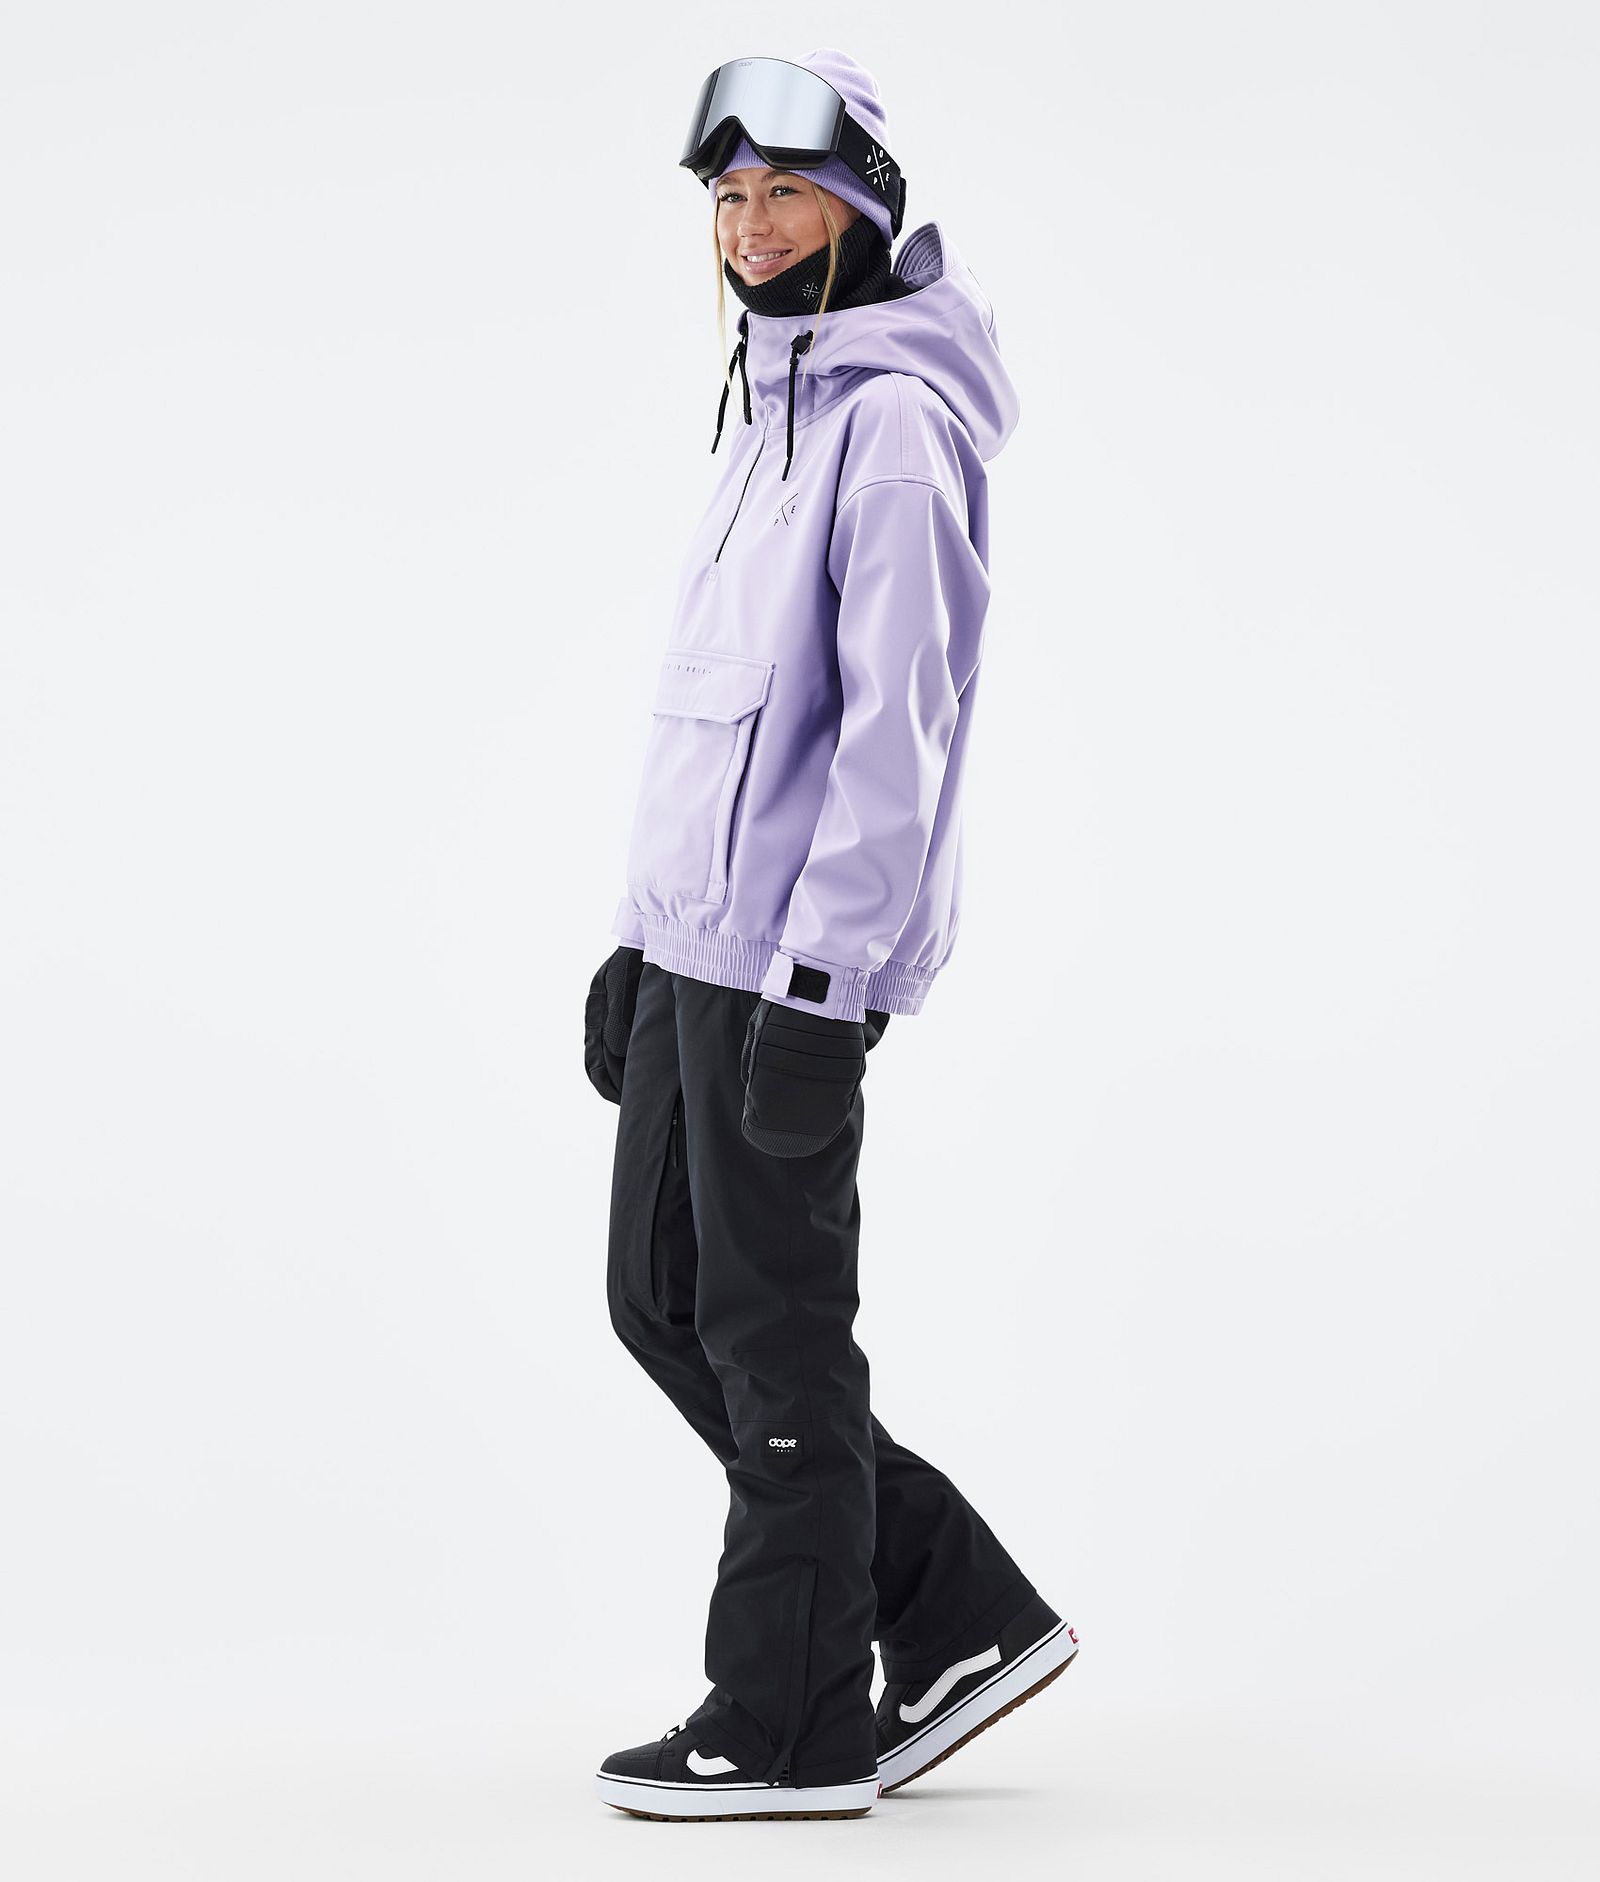 Dope Cyclone W Veste Snowboard Femme Faded Violet